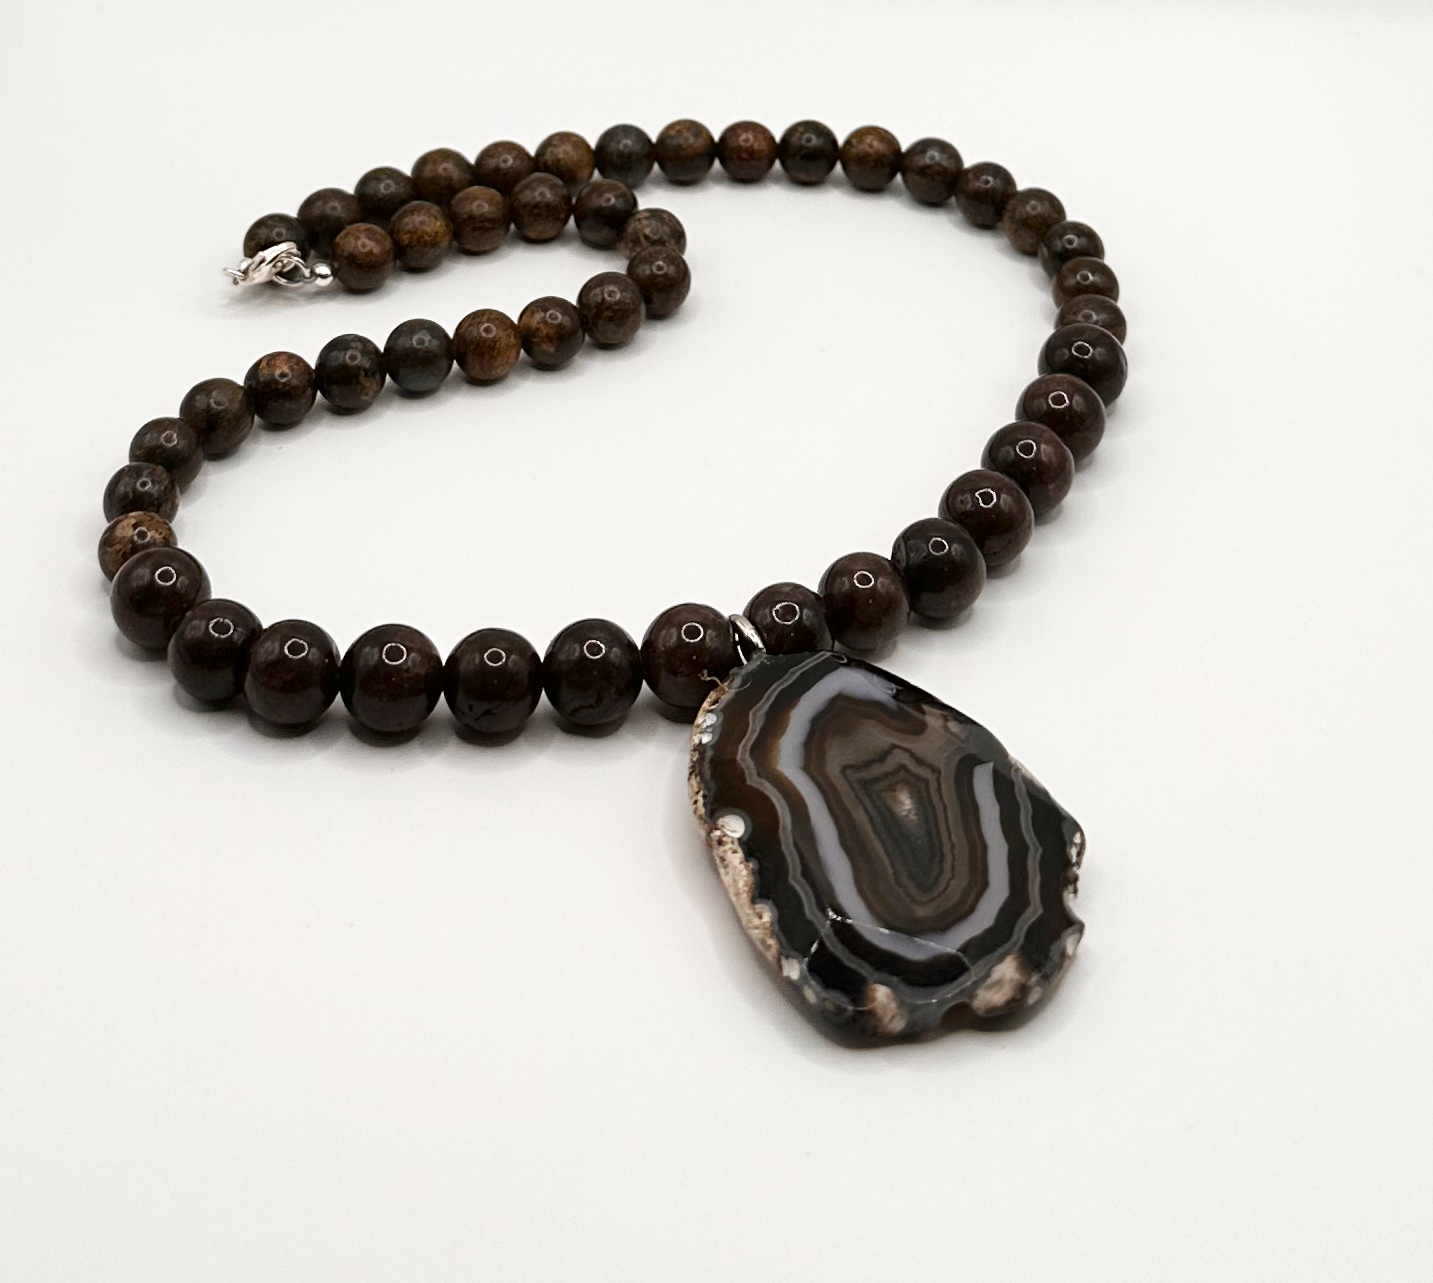 Bronzite Stone with Natural Black Banded Agate Slice Pendant